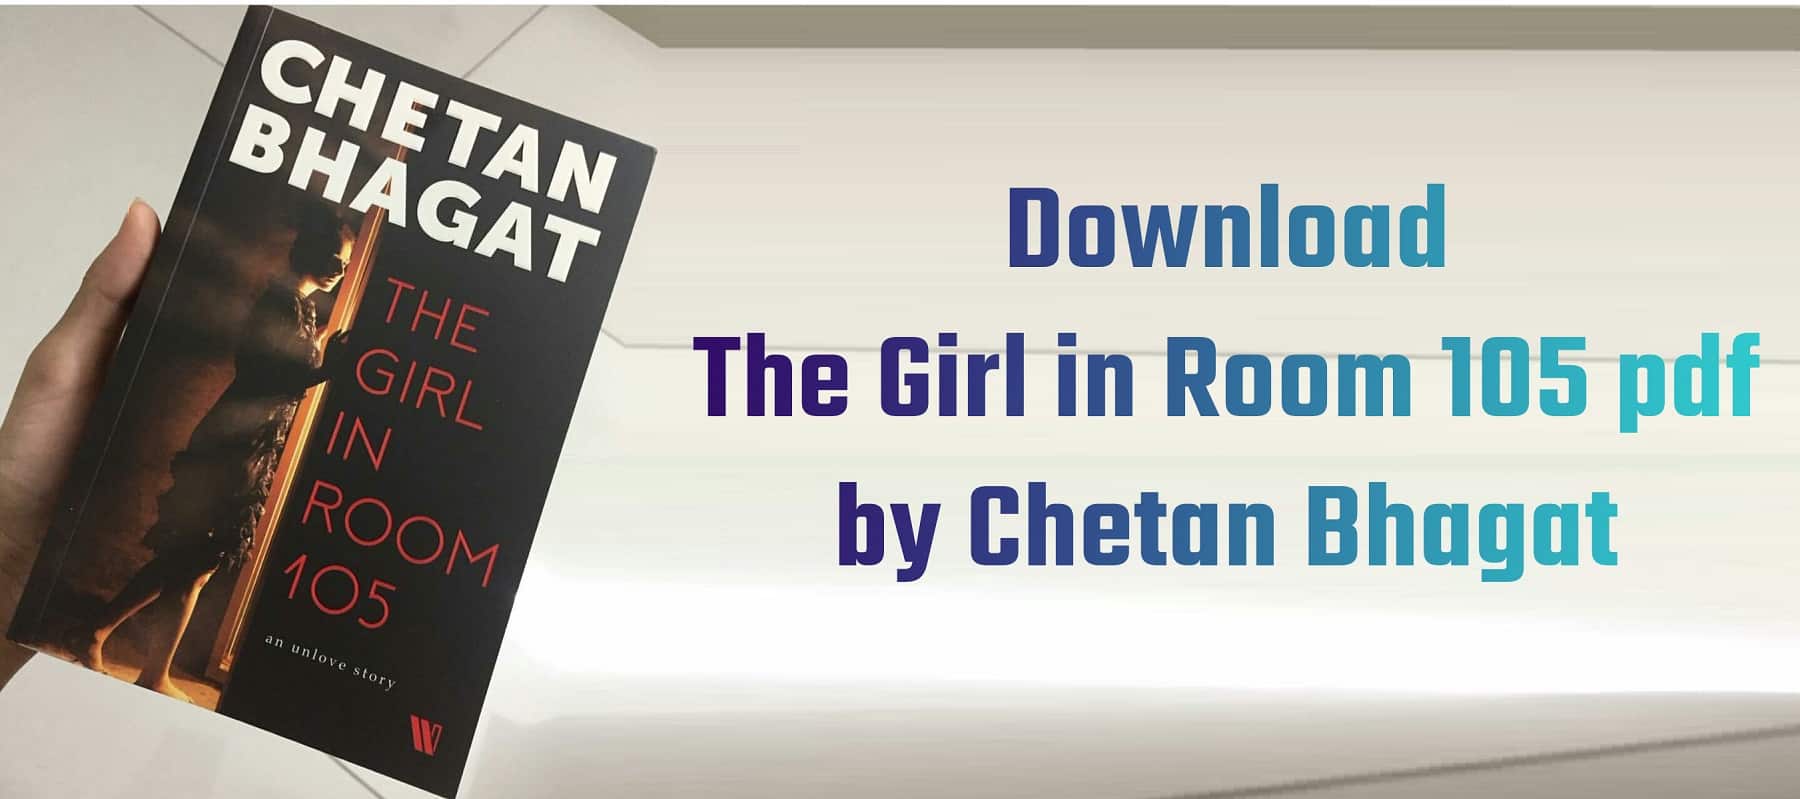 Download The Girl in Room 105 pdf by Chetan Bhagat